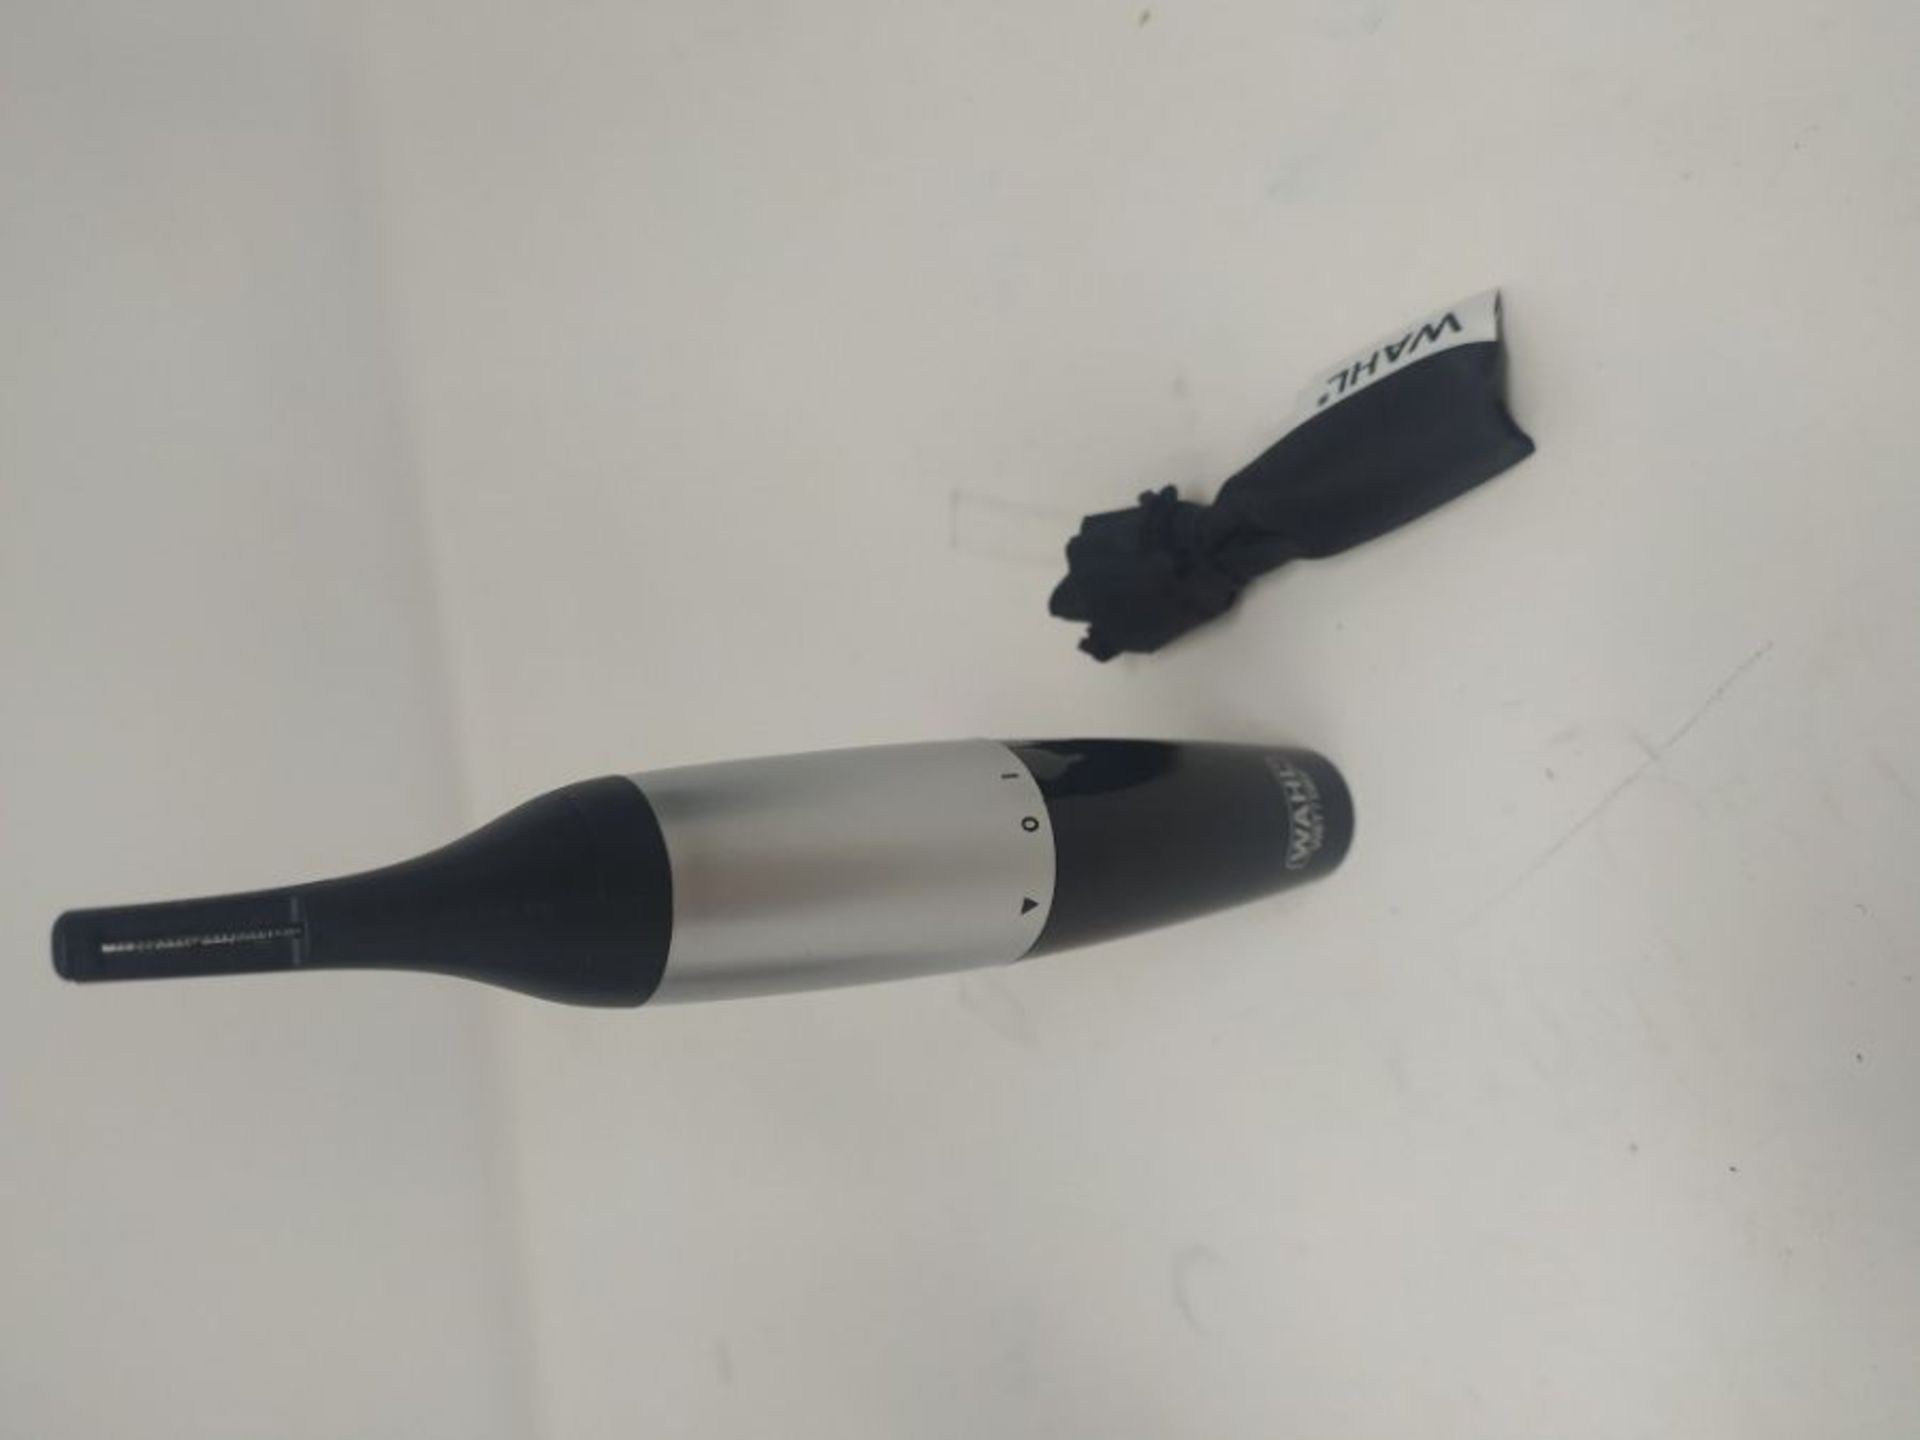 Precision, Ear, Nose and Eyebrow Trimmer, Precision Dual Blade, Vertical Trimming Head - Image 2 of 2